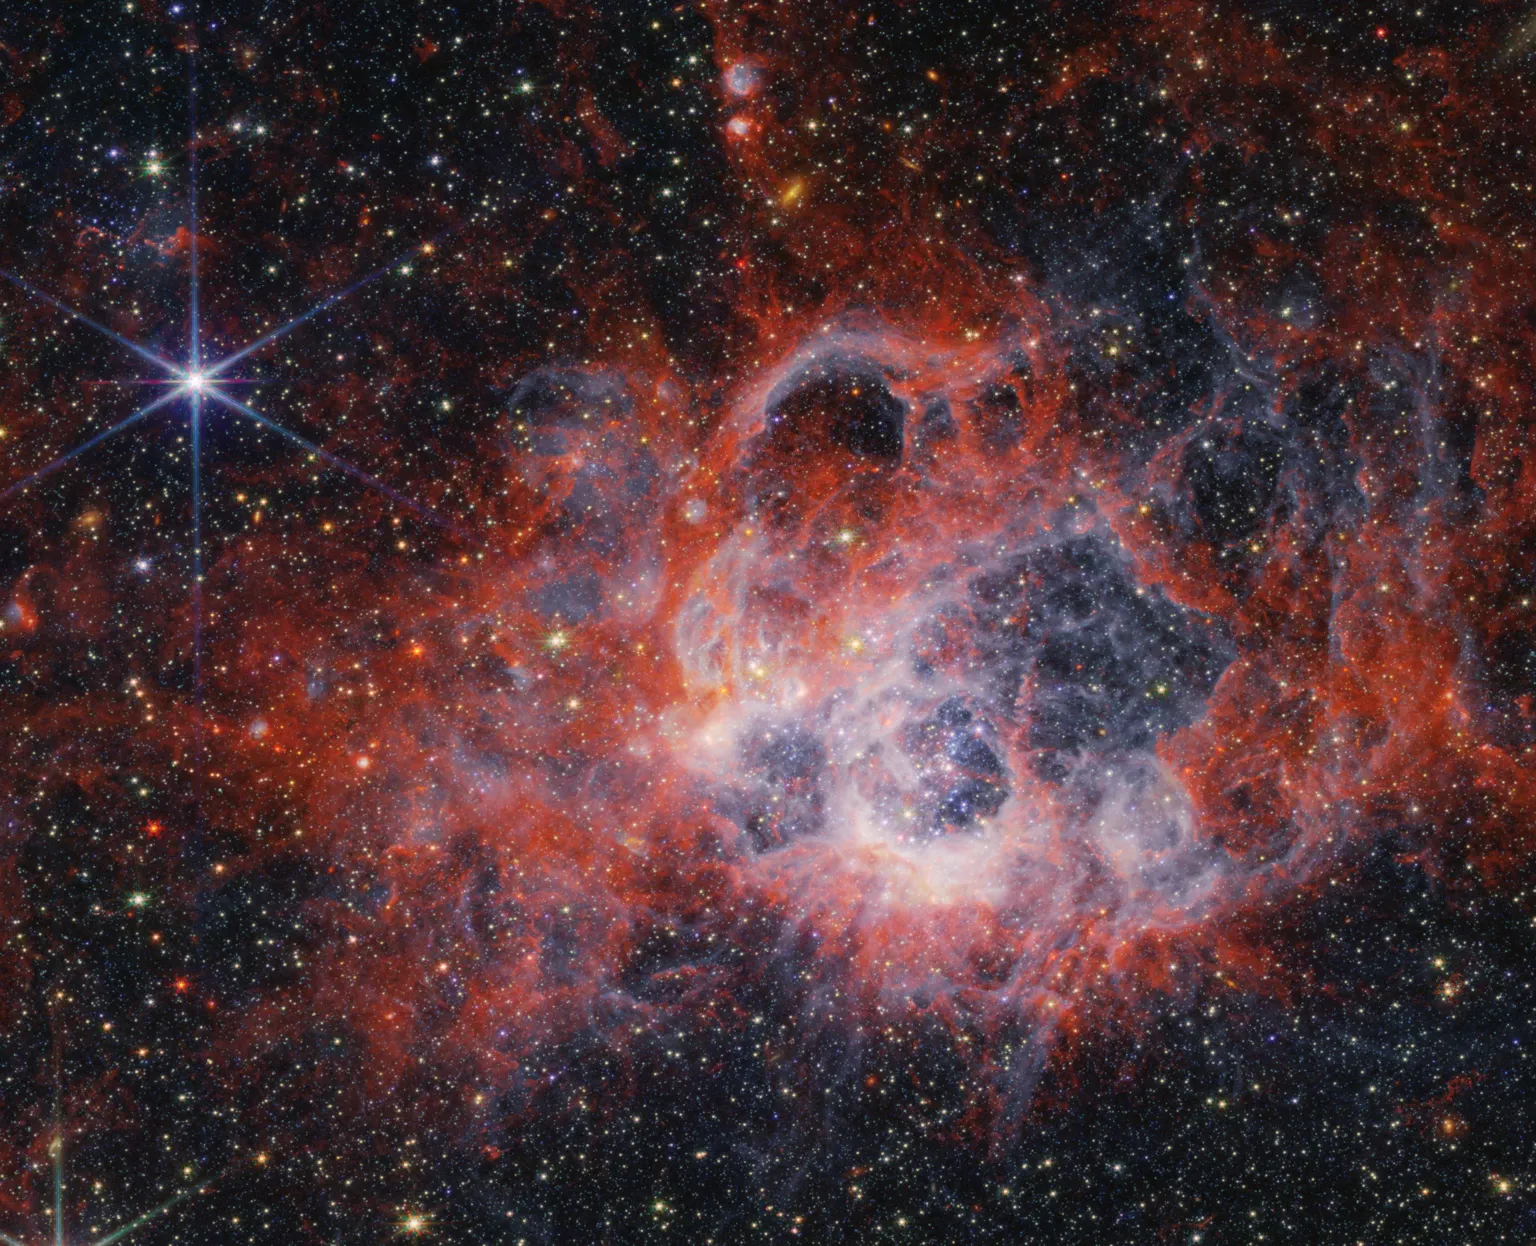 This full image from NASA’s James Webb Space Telescope’s NIRCam (Near-Infrared Camera) of star-forming region NGC 604 shows how stellar winds from bright, hot, young stars carve out cavities in surrounding gas and dust.